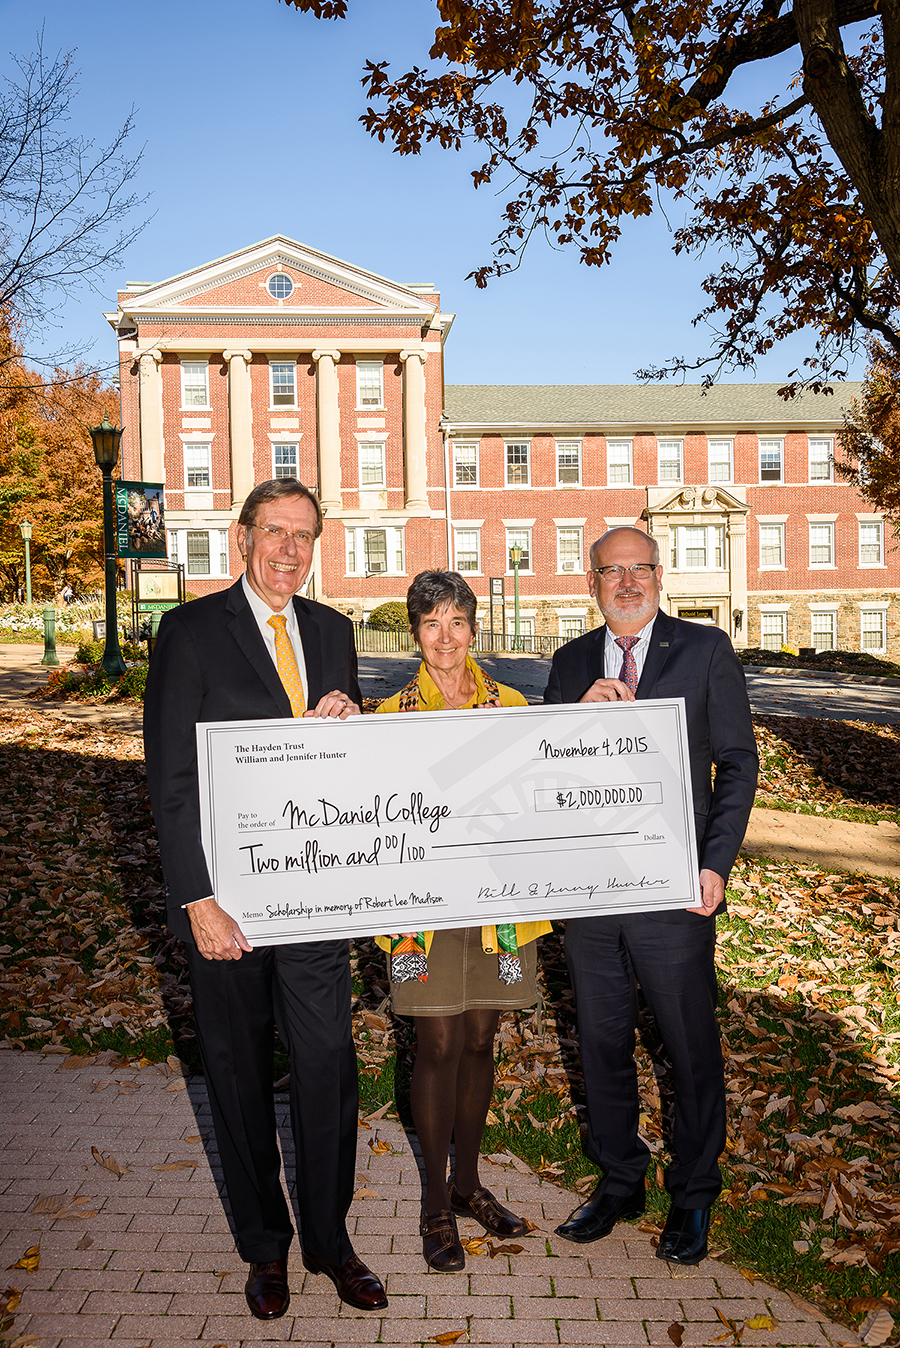 William and Jennifer Hunter with McDaniel College President Roger N. Casey